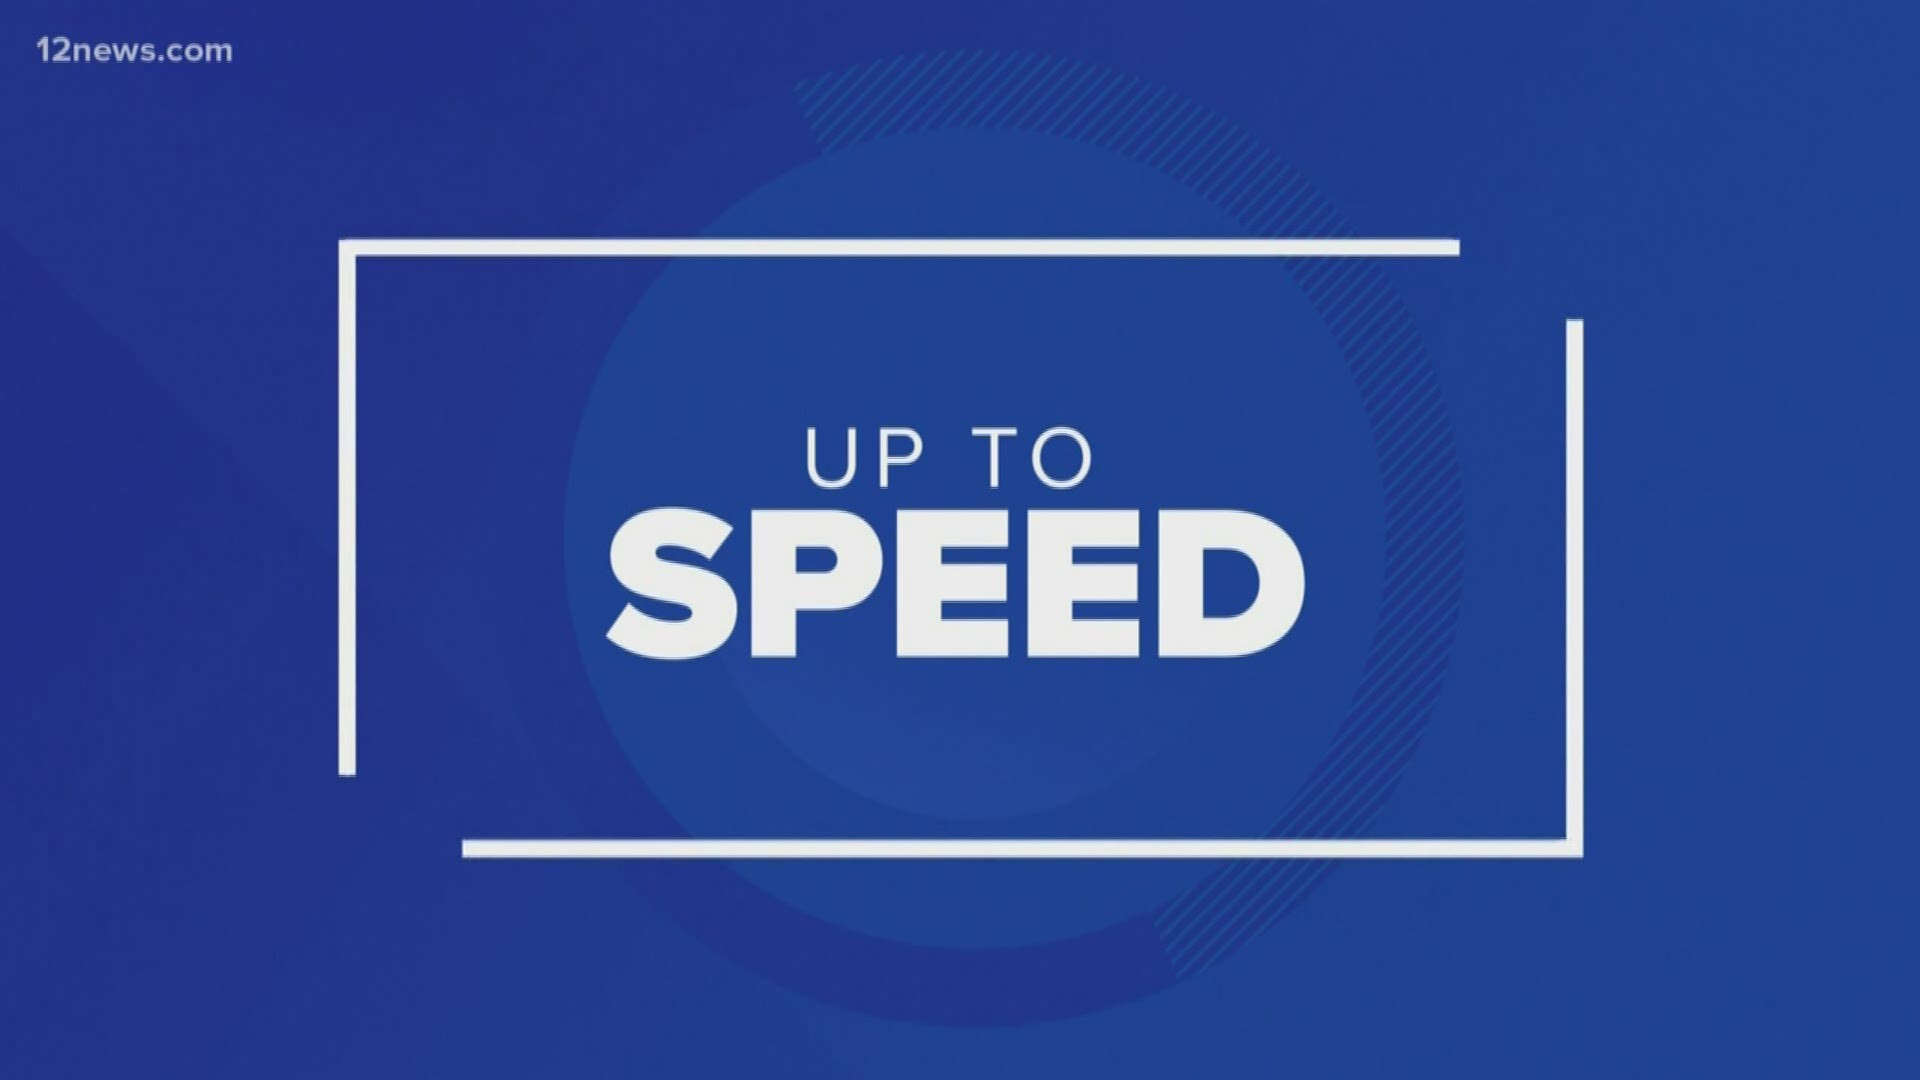 Get "Up to Speed" on the latest news happening around the Valley and across the country on Wednesday evening.